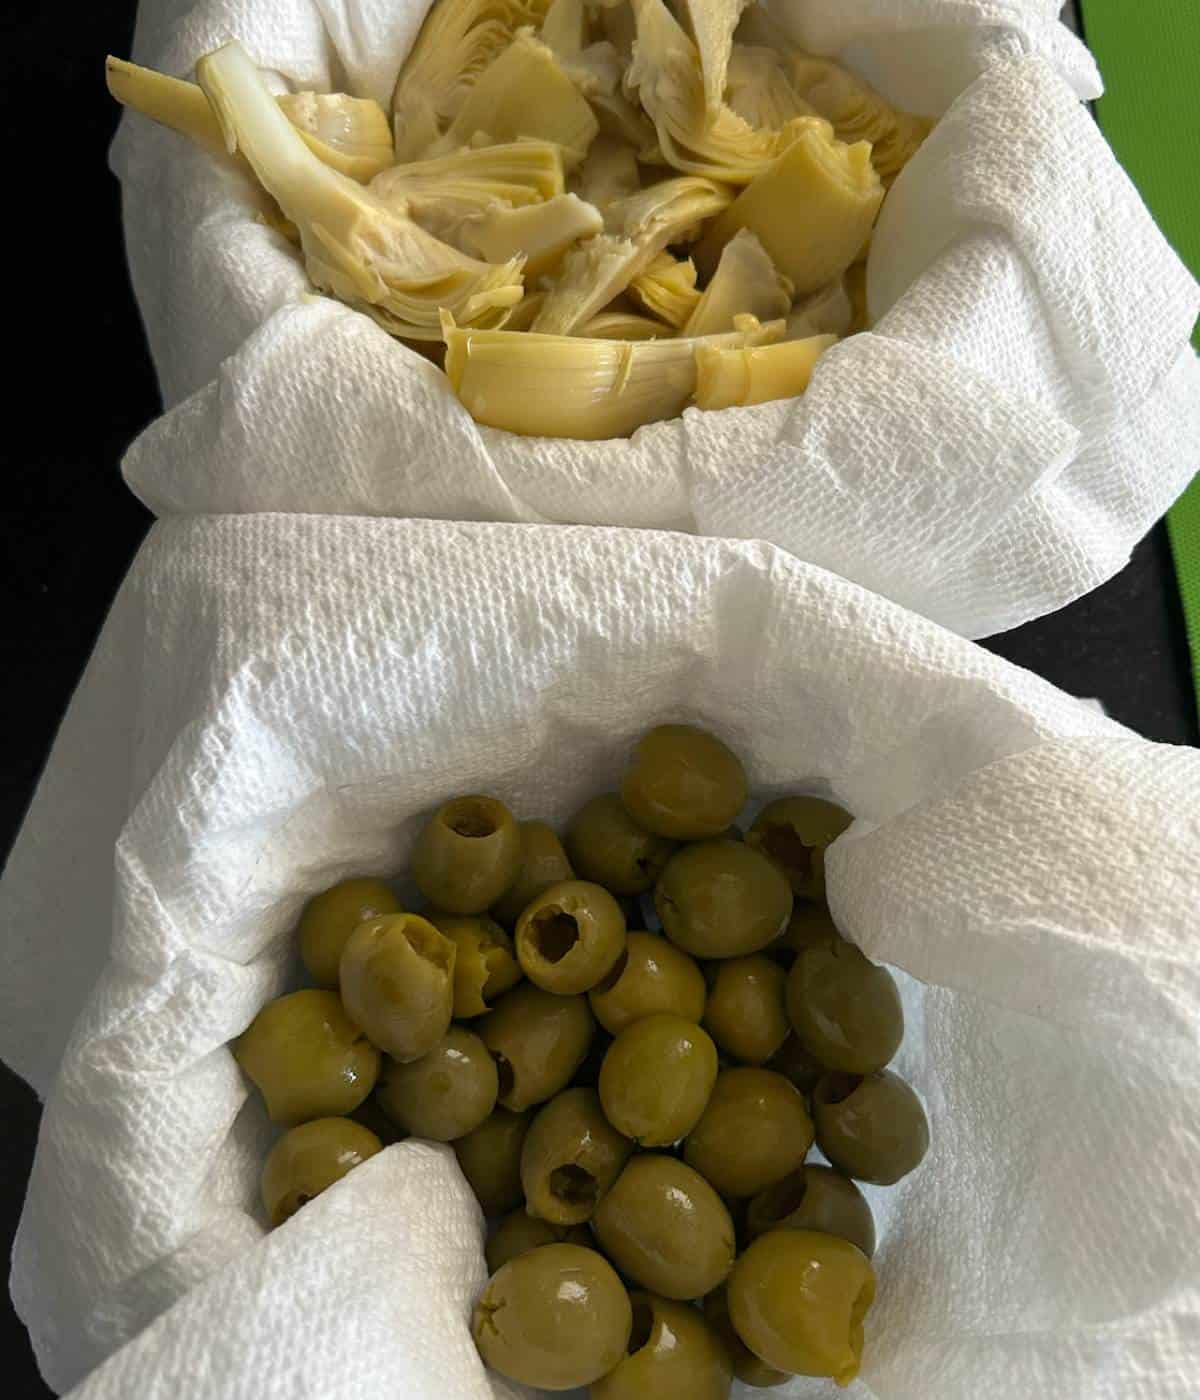 Olives and artichokes in bowls with paper towels to remove excess juices.